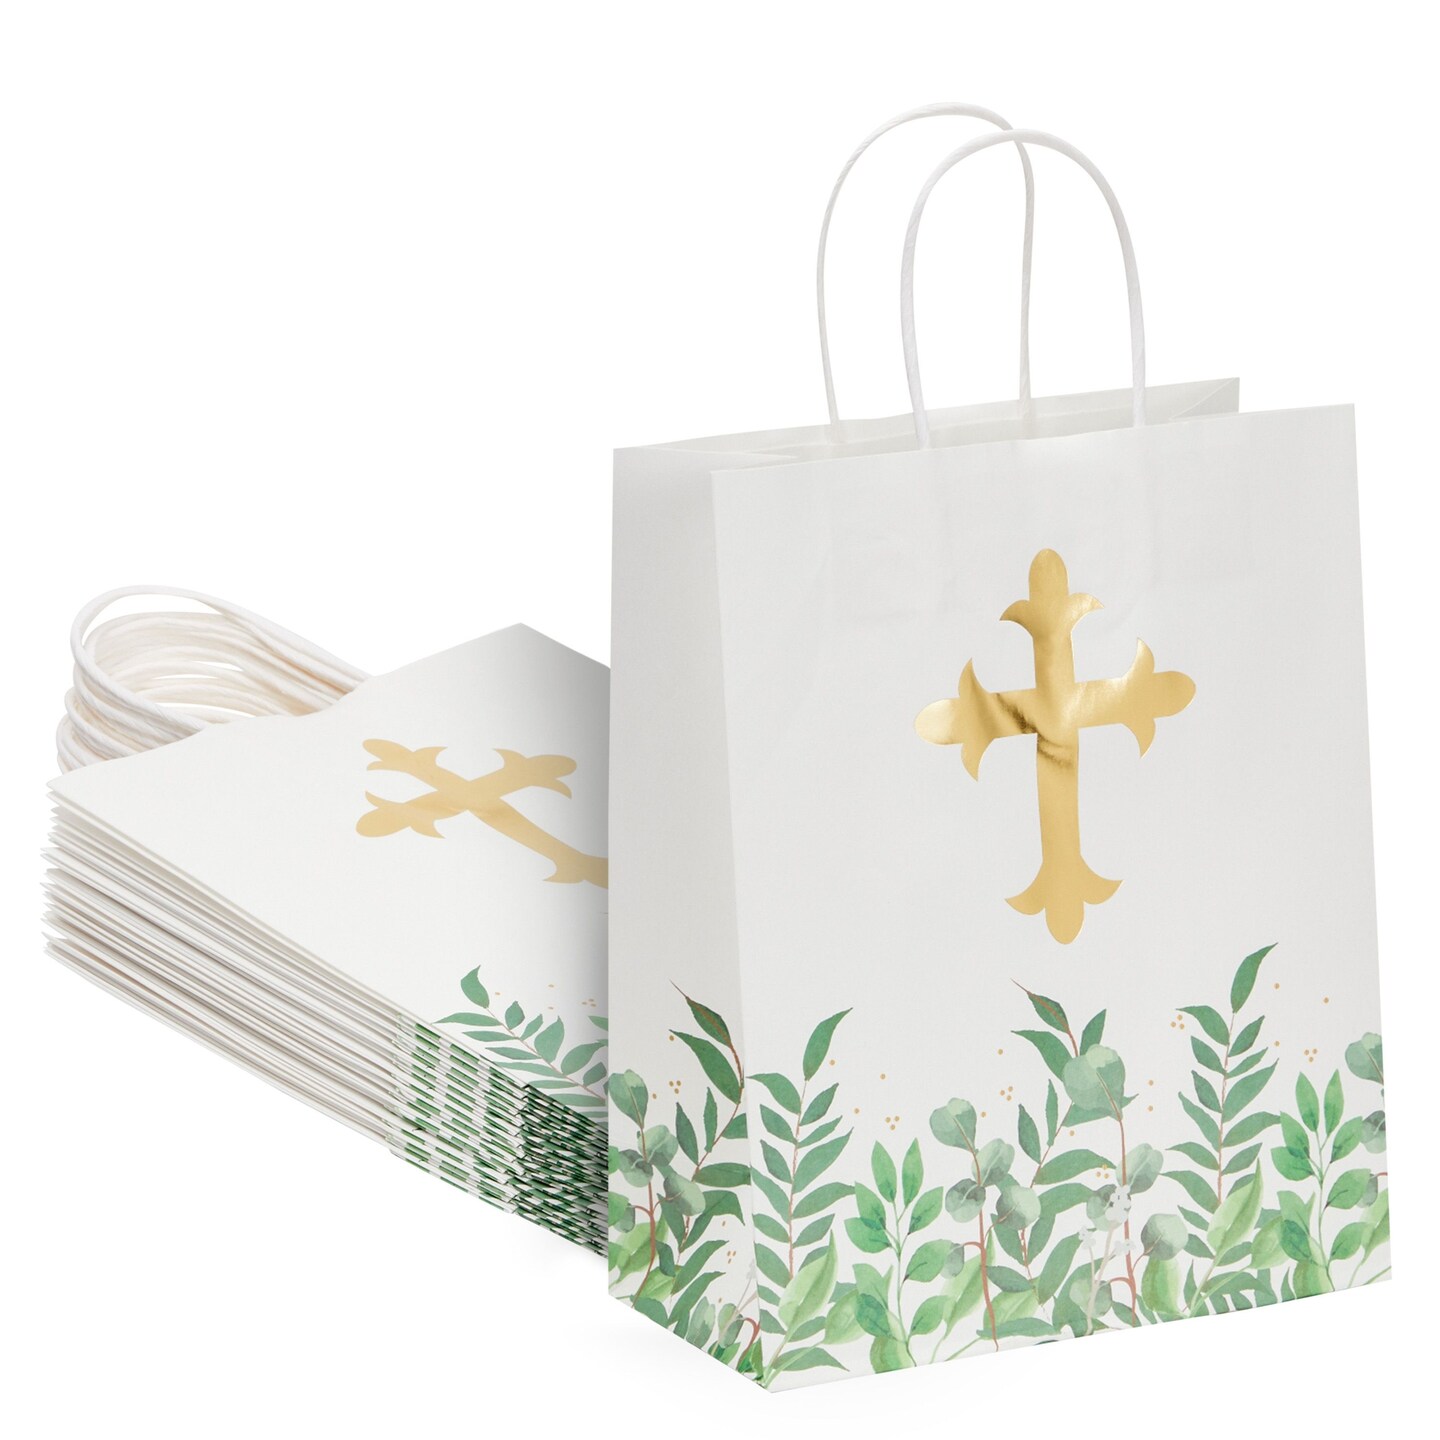 FaCraft First Communion Gift Bag for Kids Boys Girl 11 Baptism Gifts Bag  with Handle Large Gift Bag with Tissue Paper for Christian Christenings  Confirmations Religious Cross Gift Bags for Girl Boy 